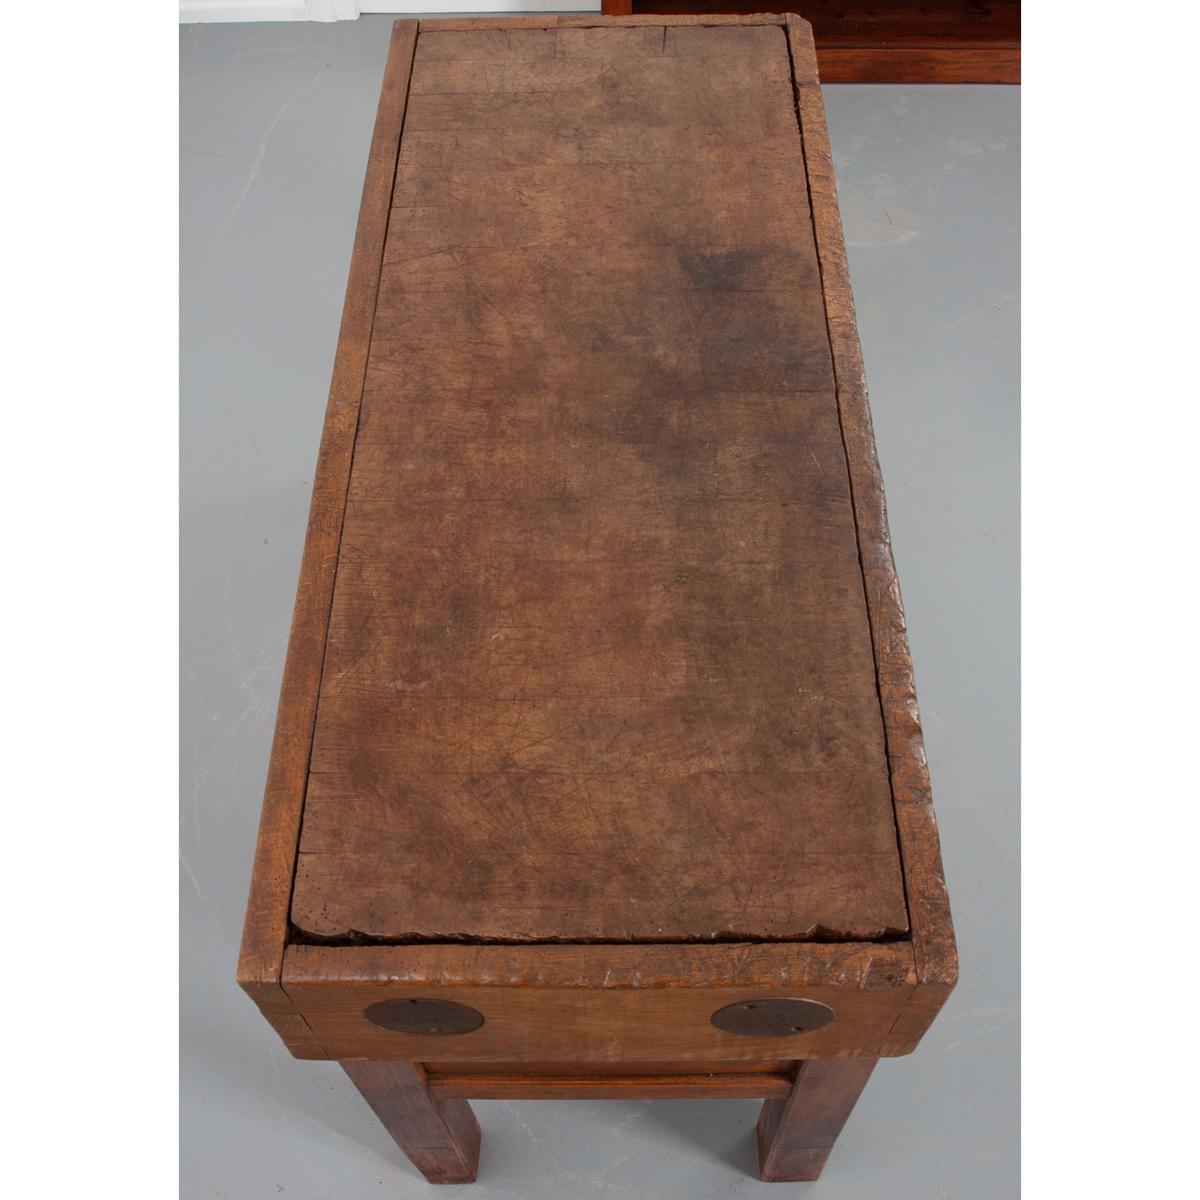 A fine butcher block table, made in France, circa 1880. The table’s top boasts exceptional patination. Grooves have been left from decades of knife work and butchery. The top has dovetail joinery at the corners and iron reinforcements to keep the